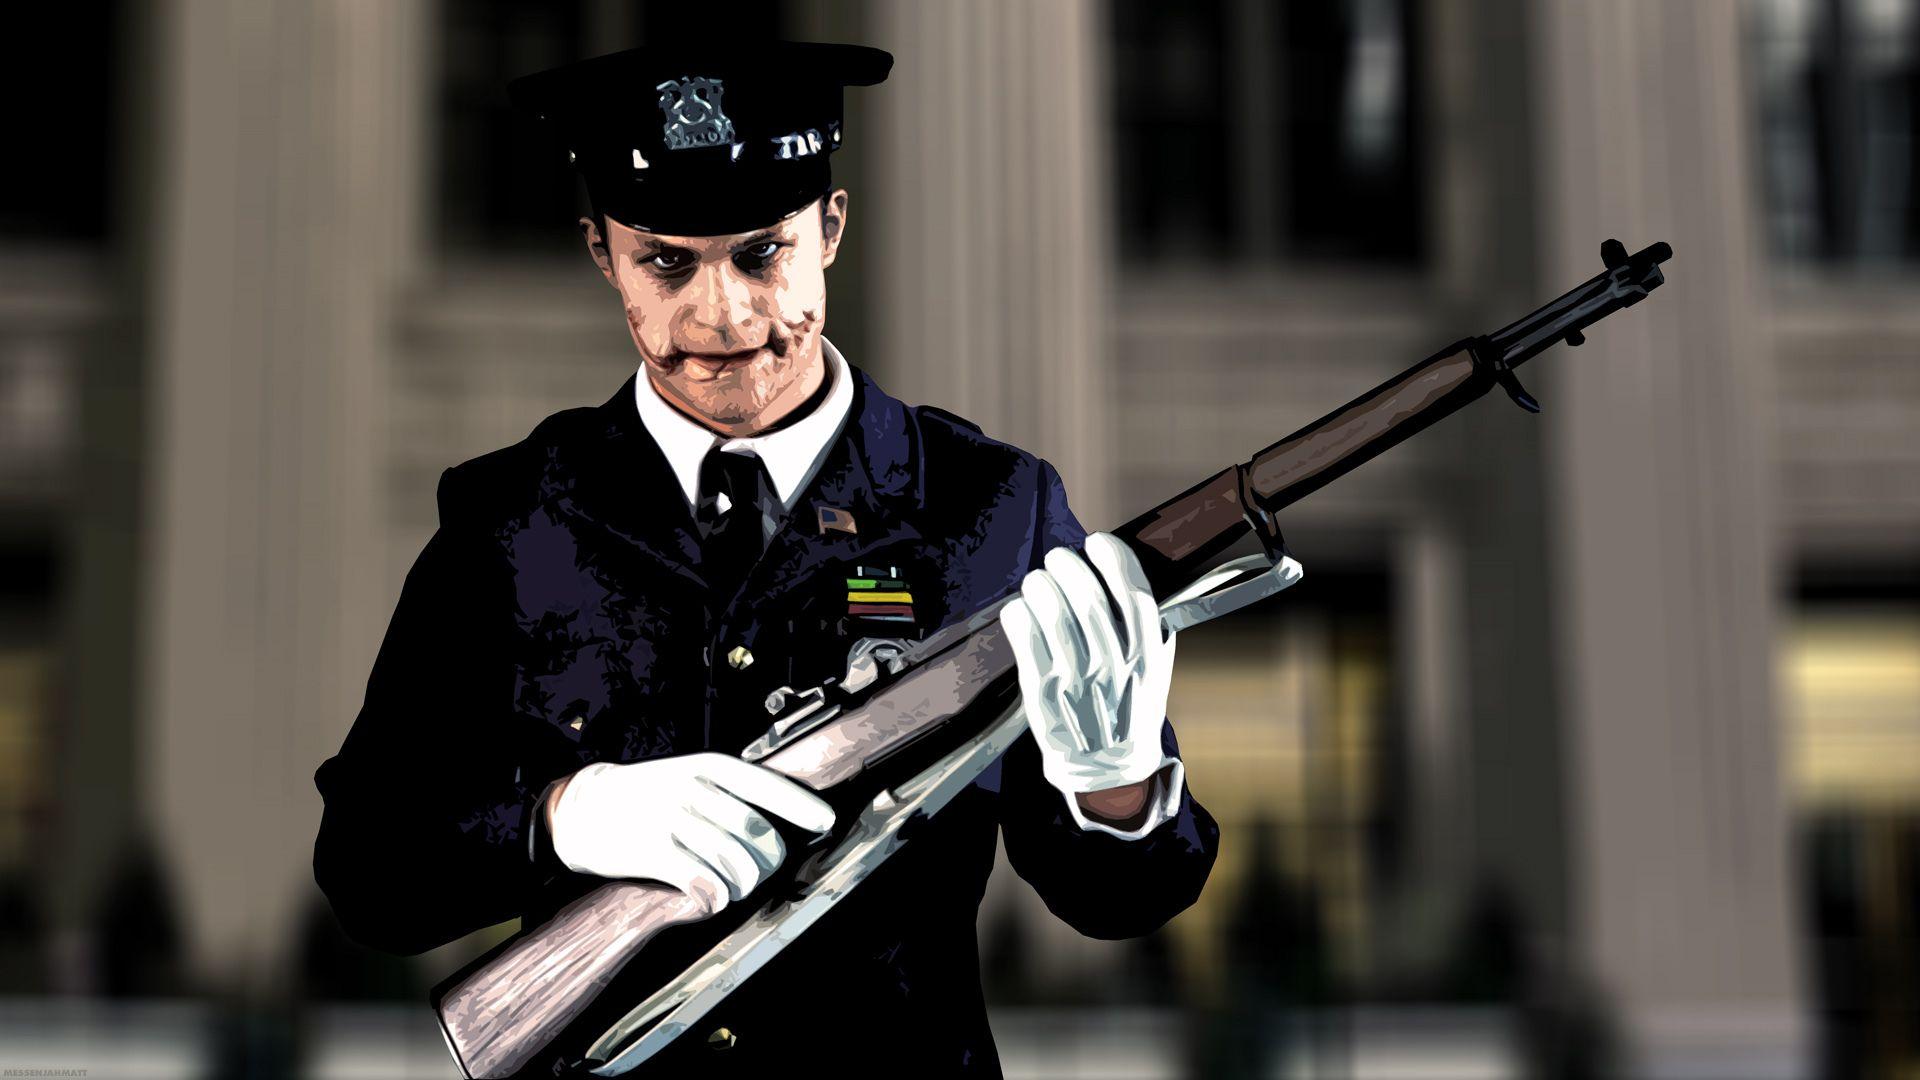 A police officer Joker wallpaper and image, picture